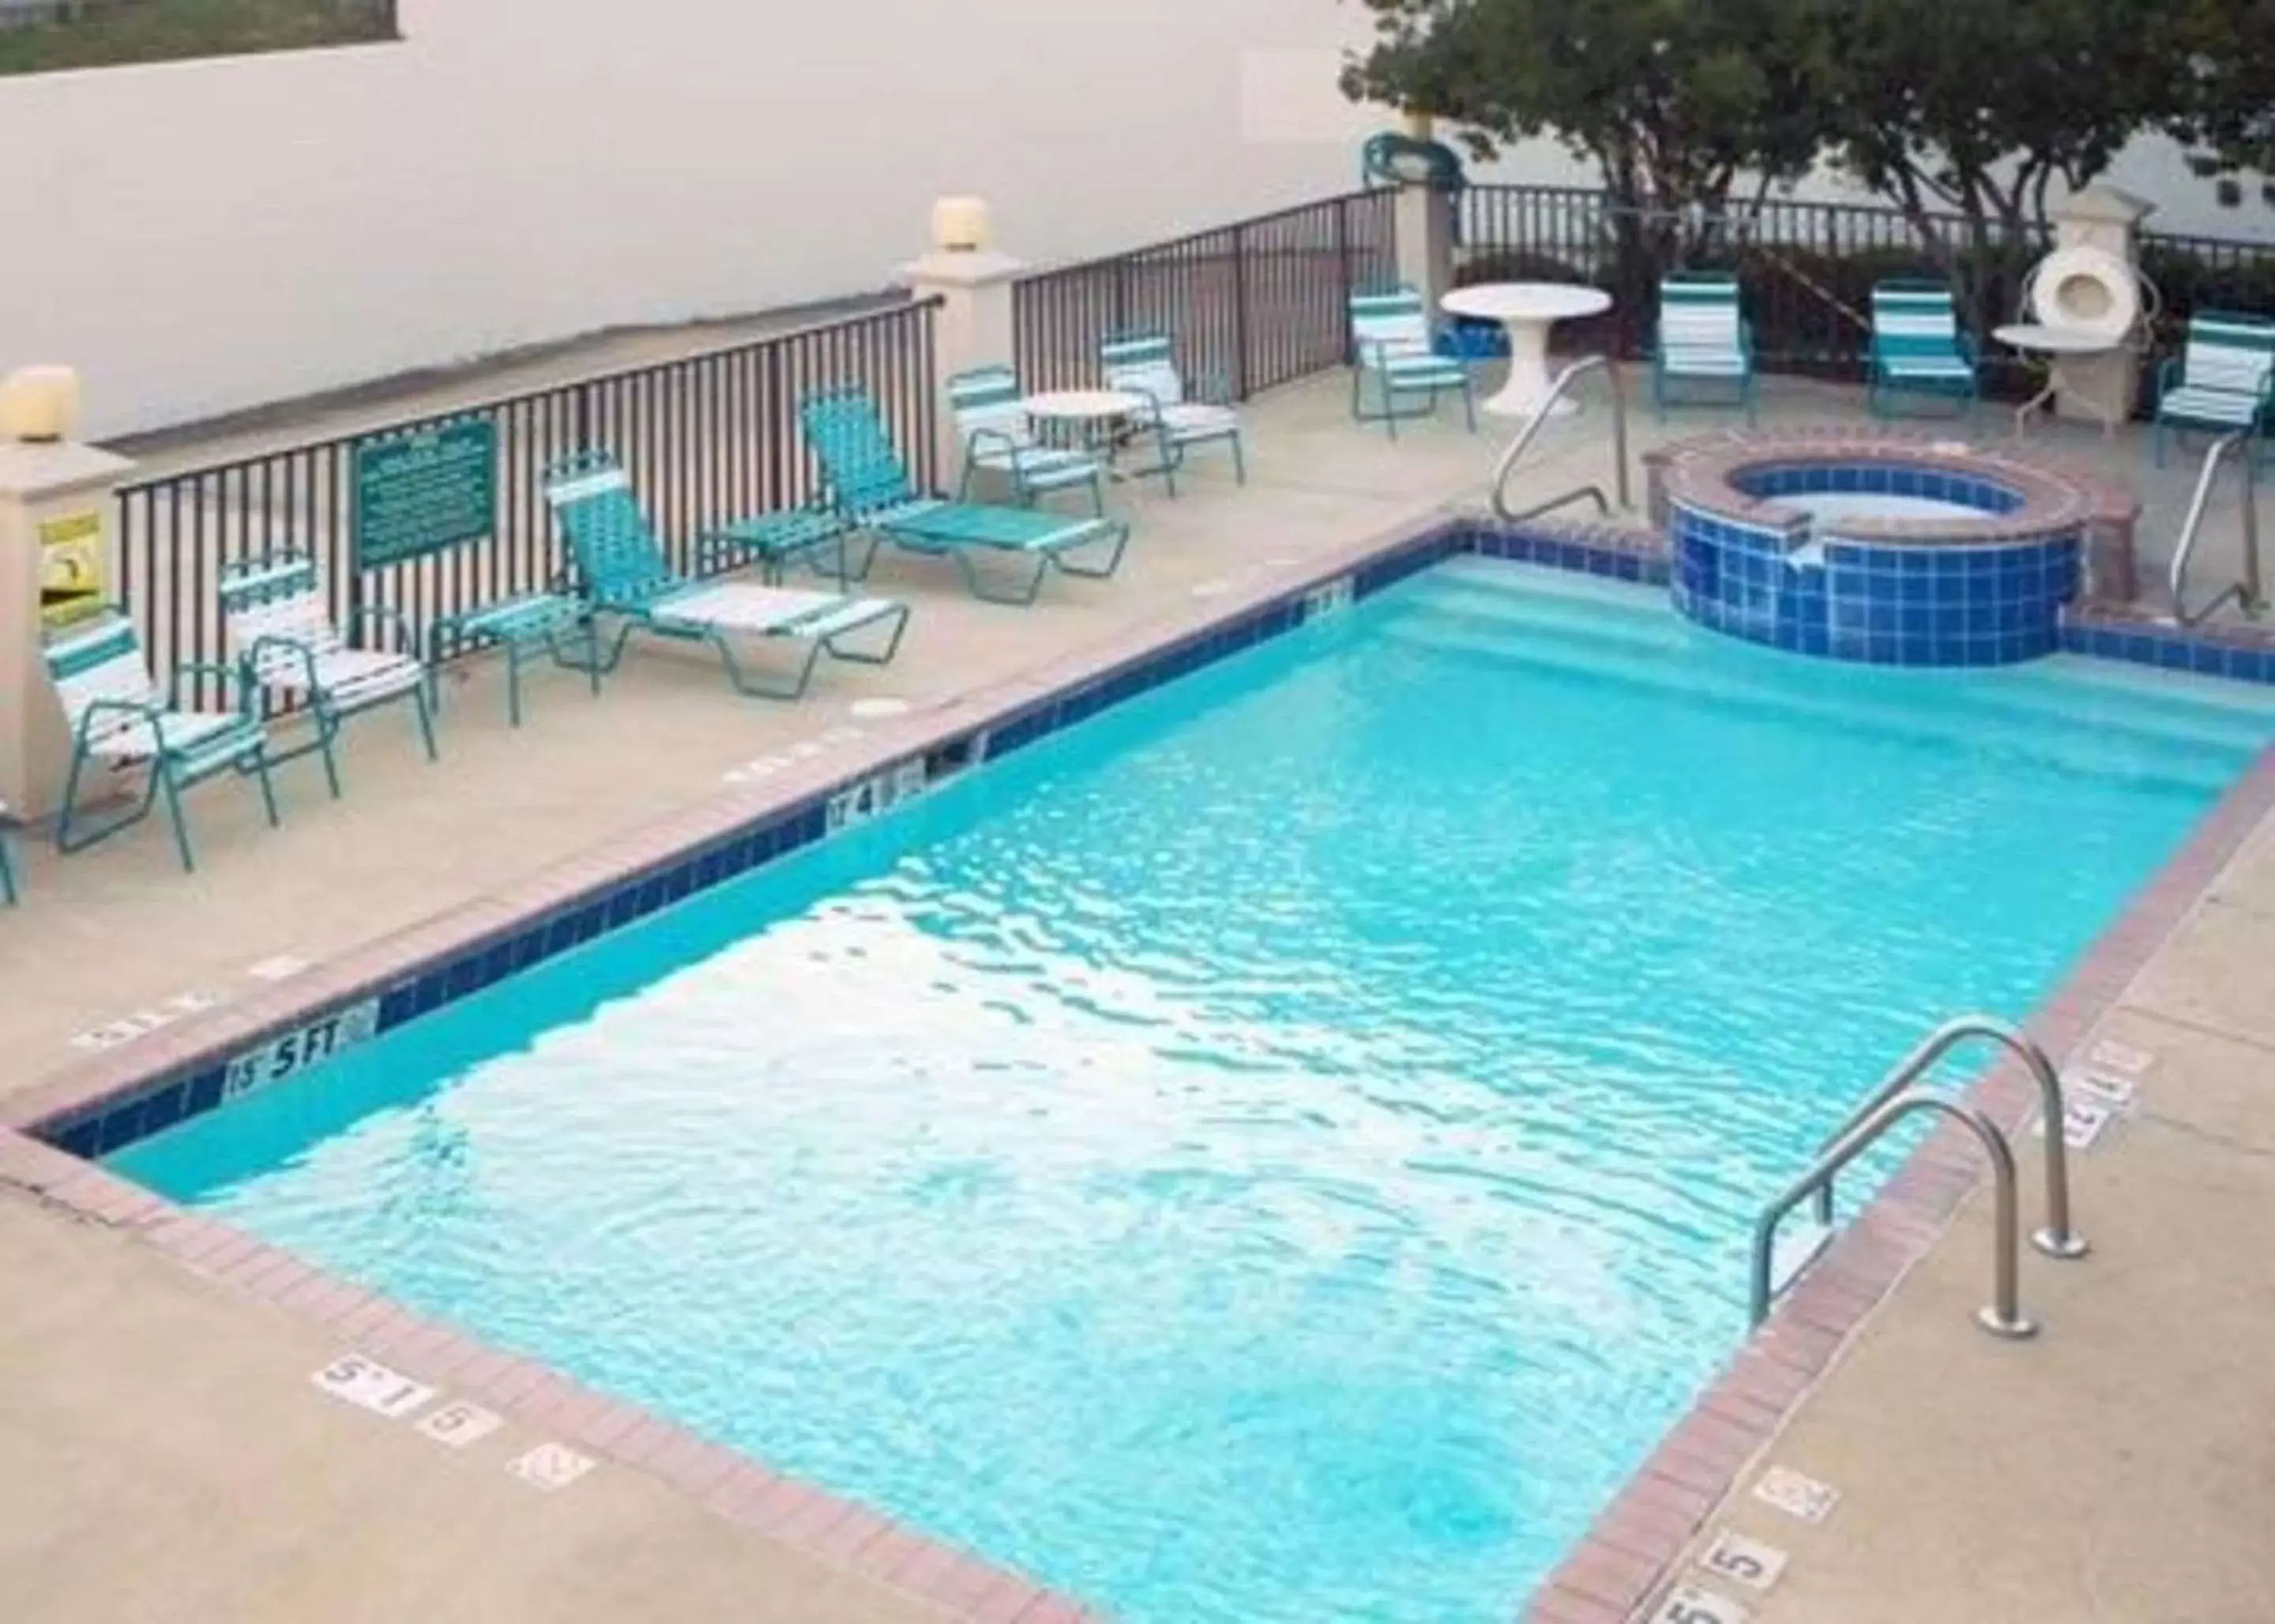 On site, Swimming Pool in Quality Inn & Suites